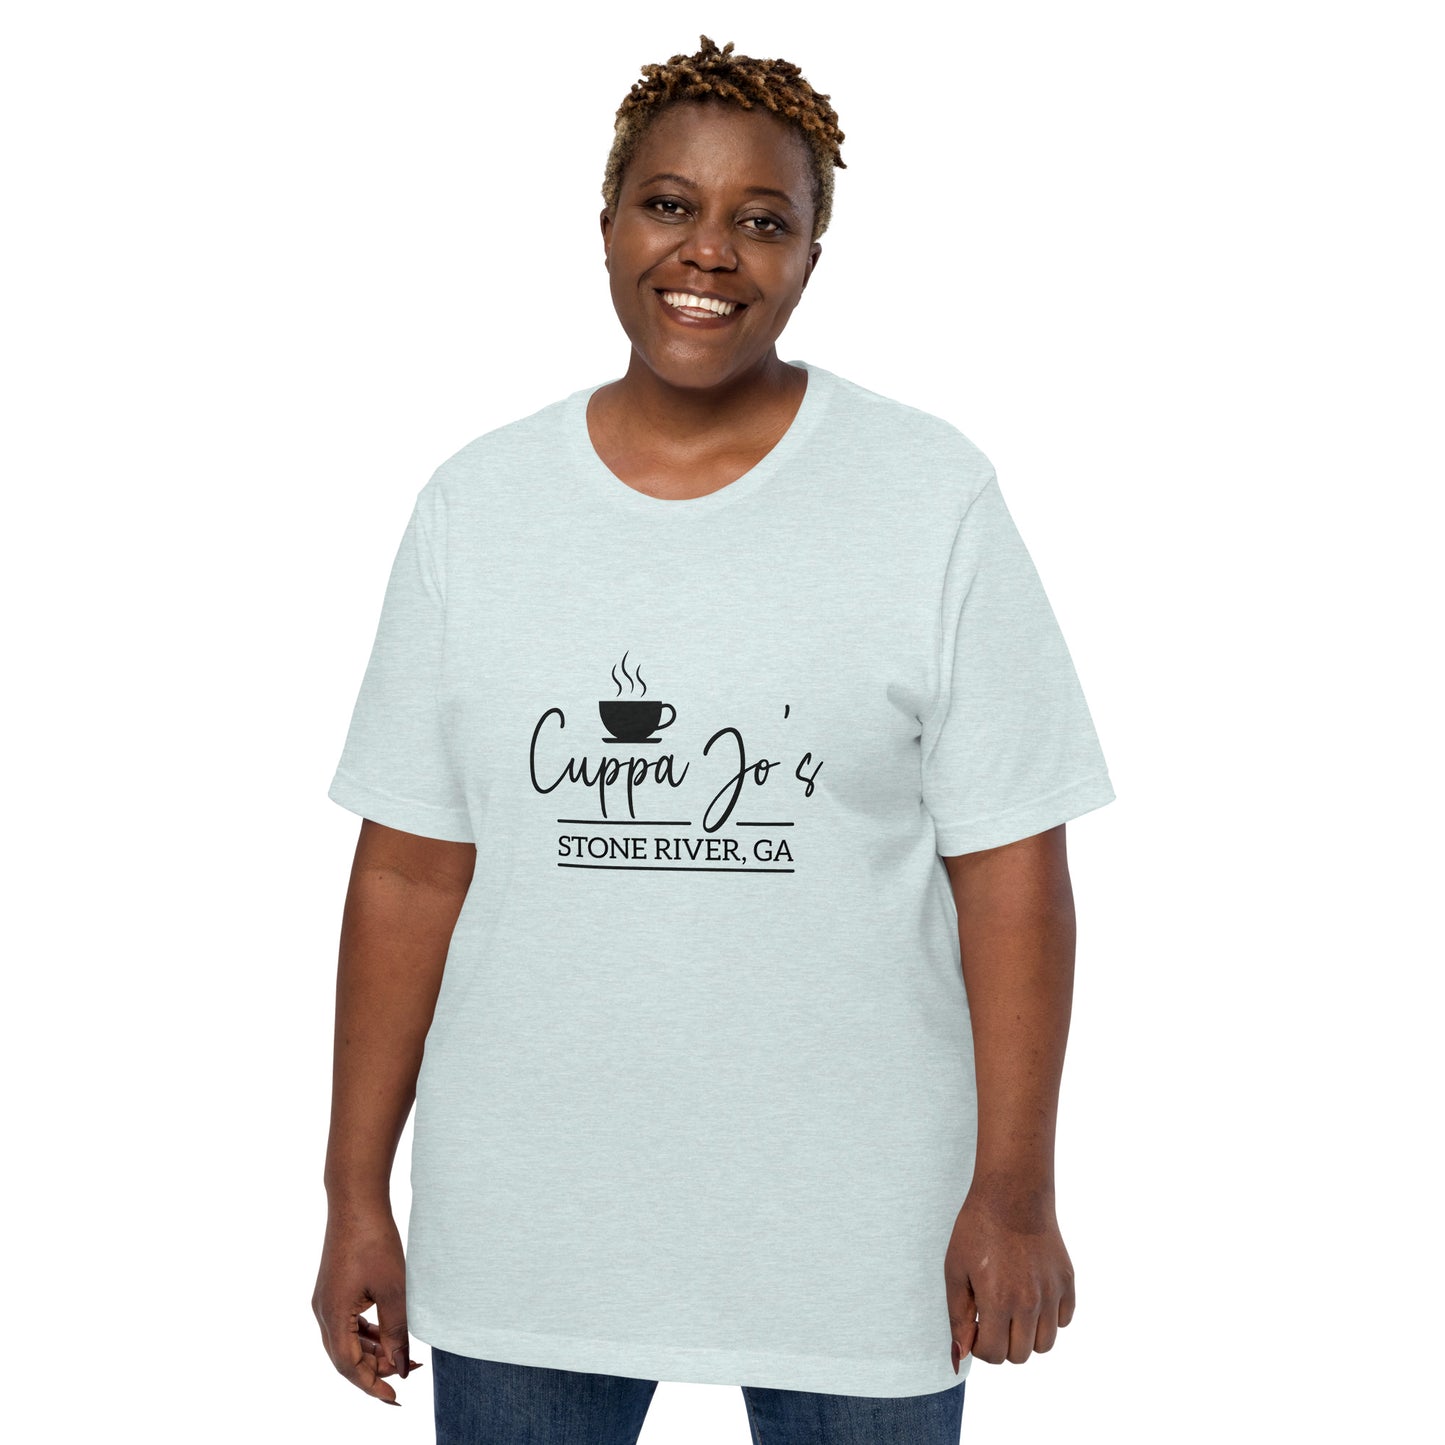 Unisex t-shirt FEATURING CUPPA JO'S FROM THE STONE RIVER SERIES!